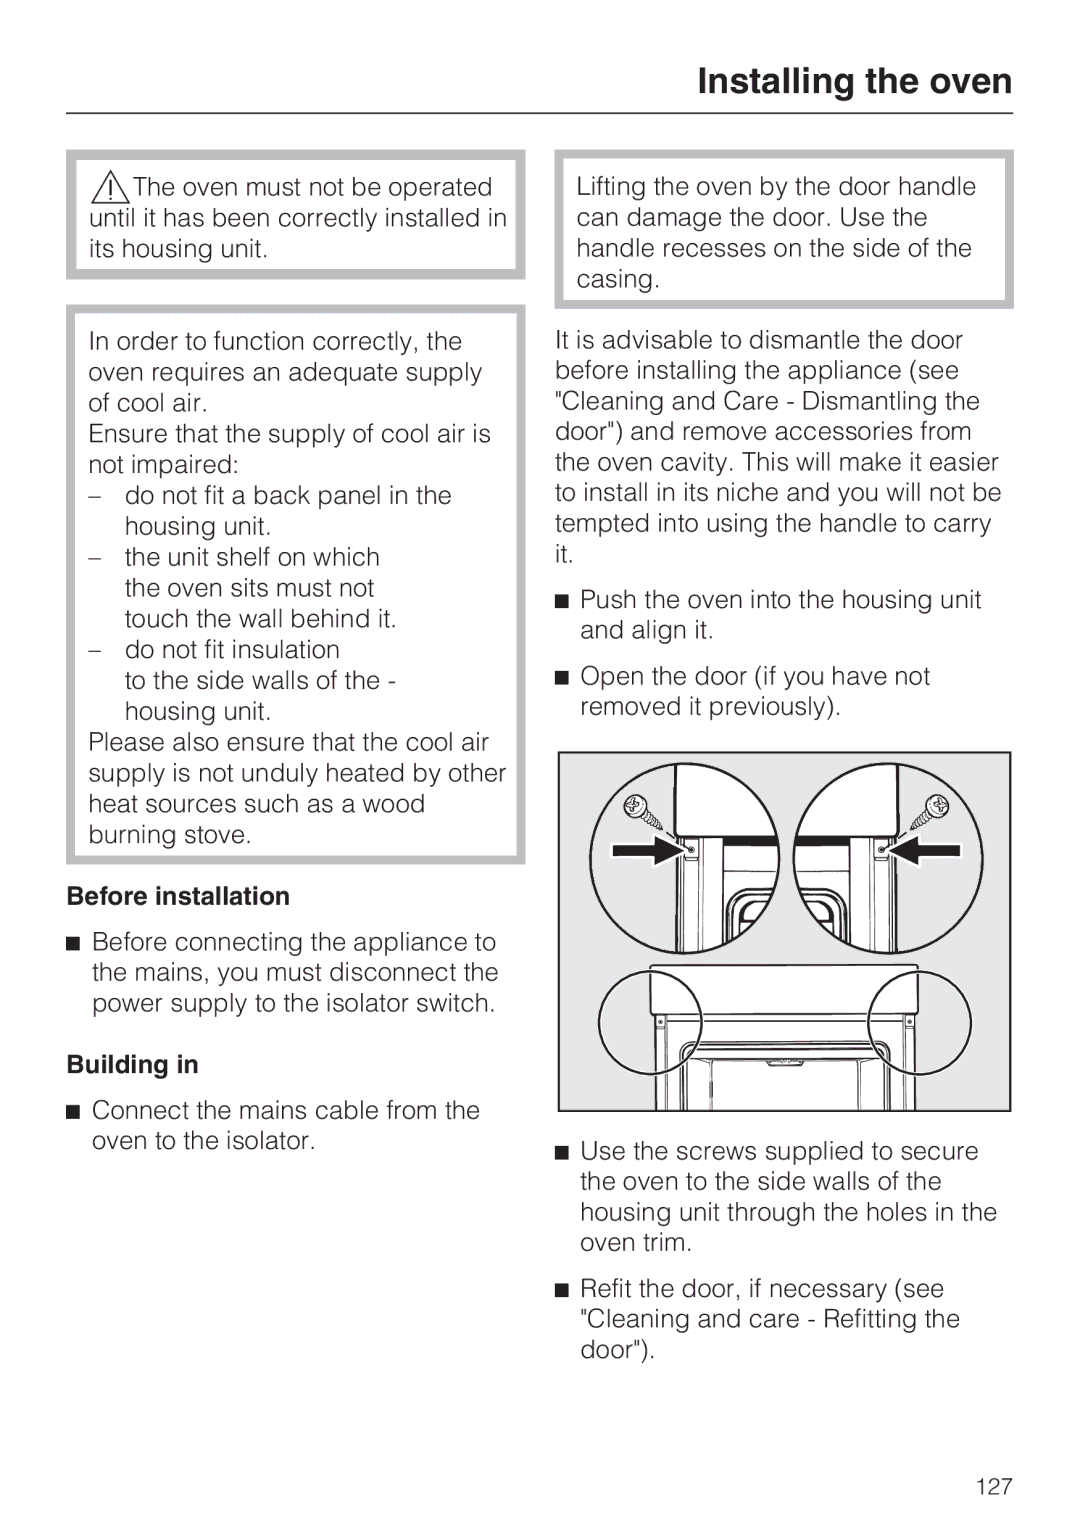 Miele 10 110 510 installation instructions Installing the oven, Before installation, Building 